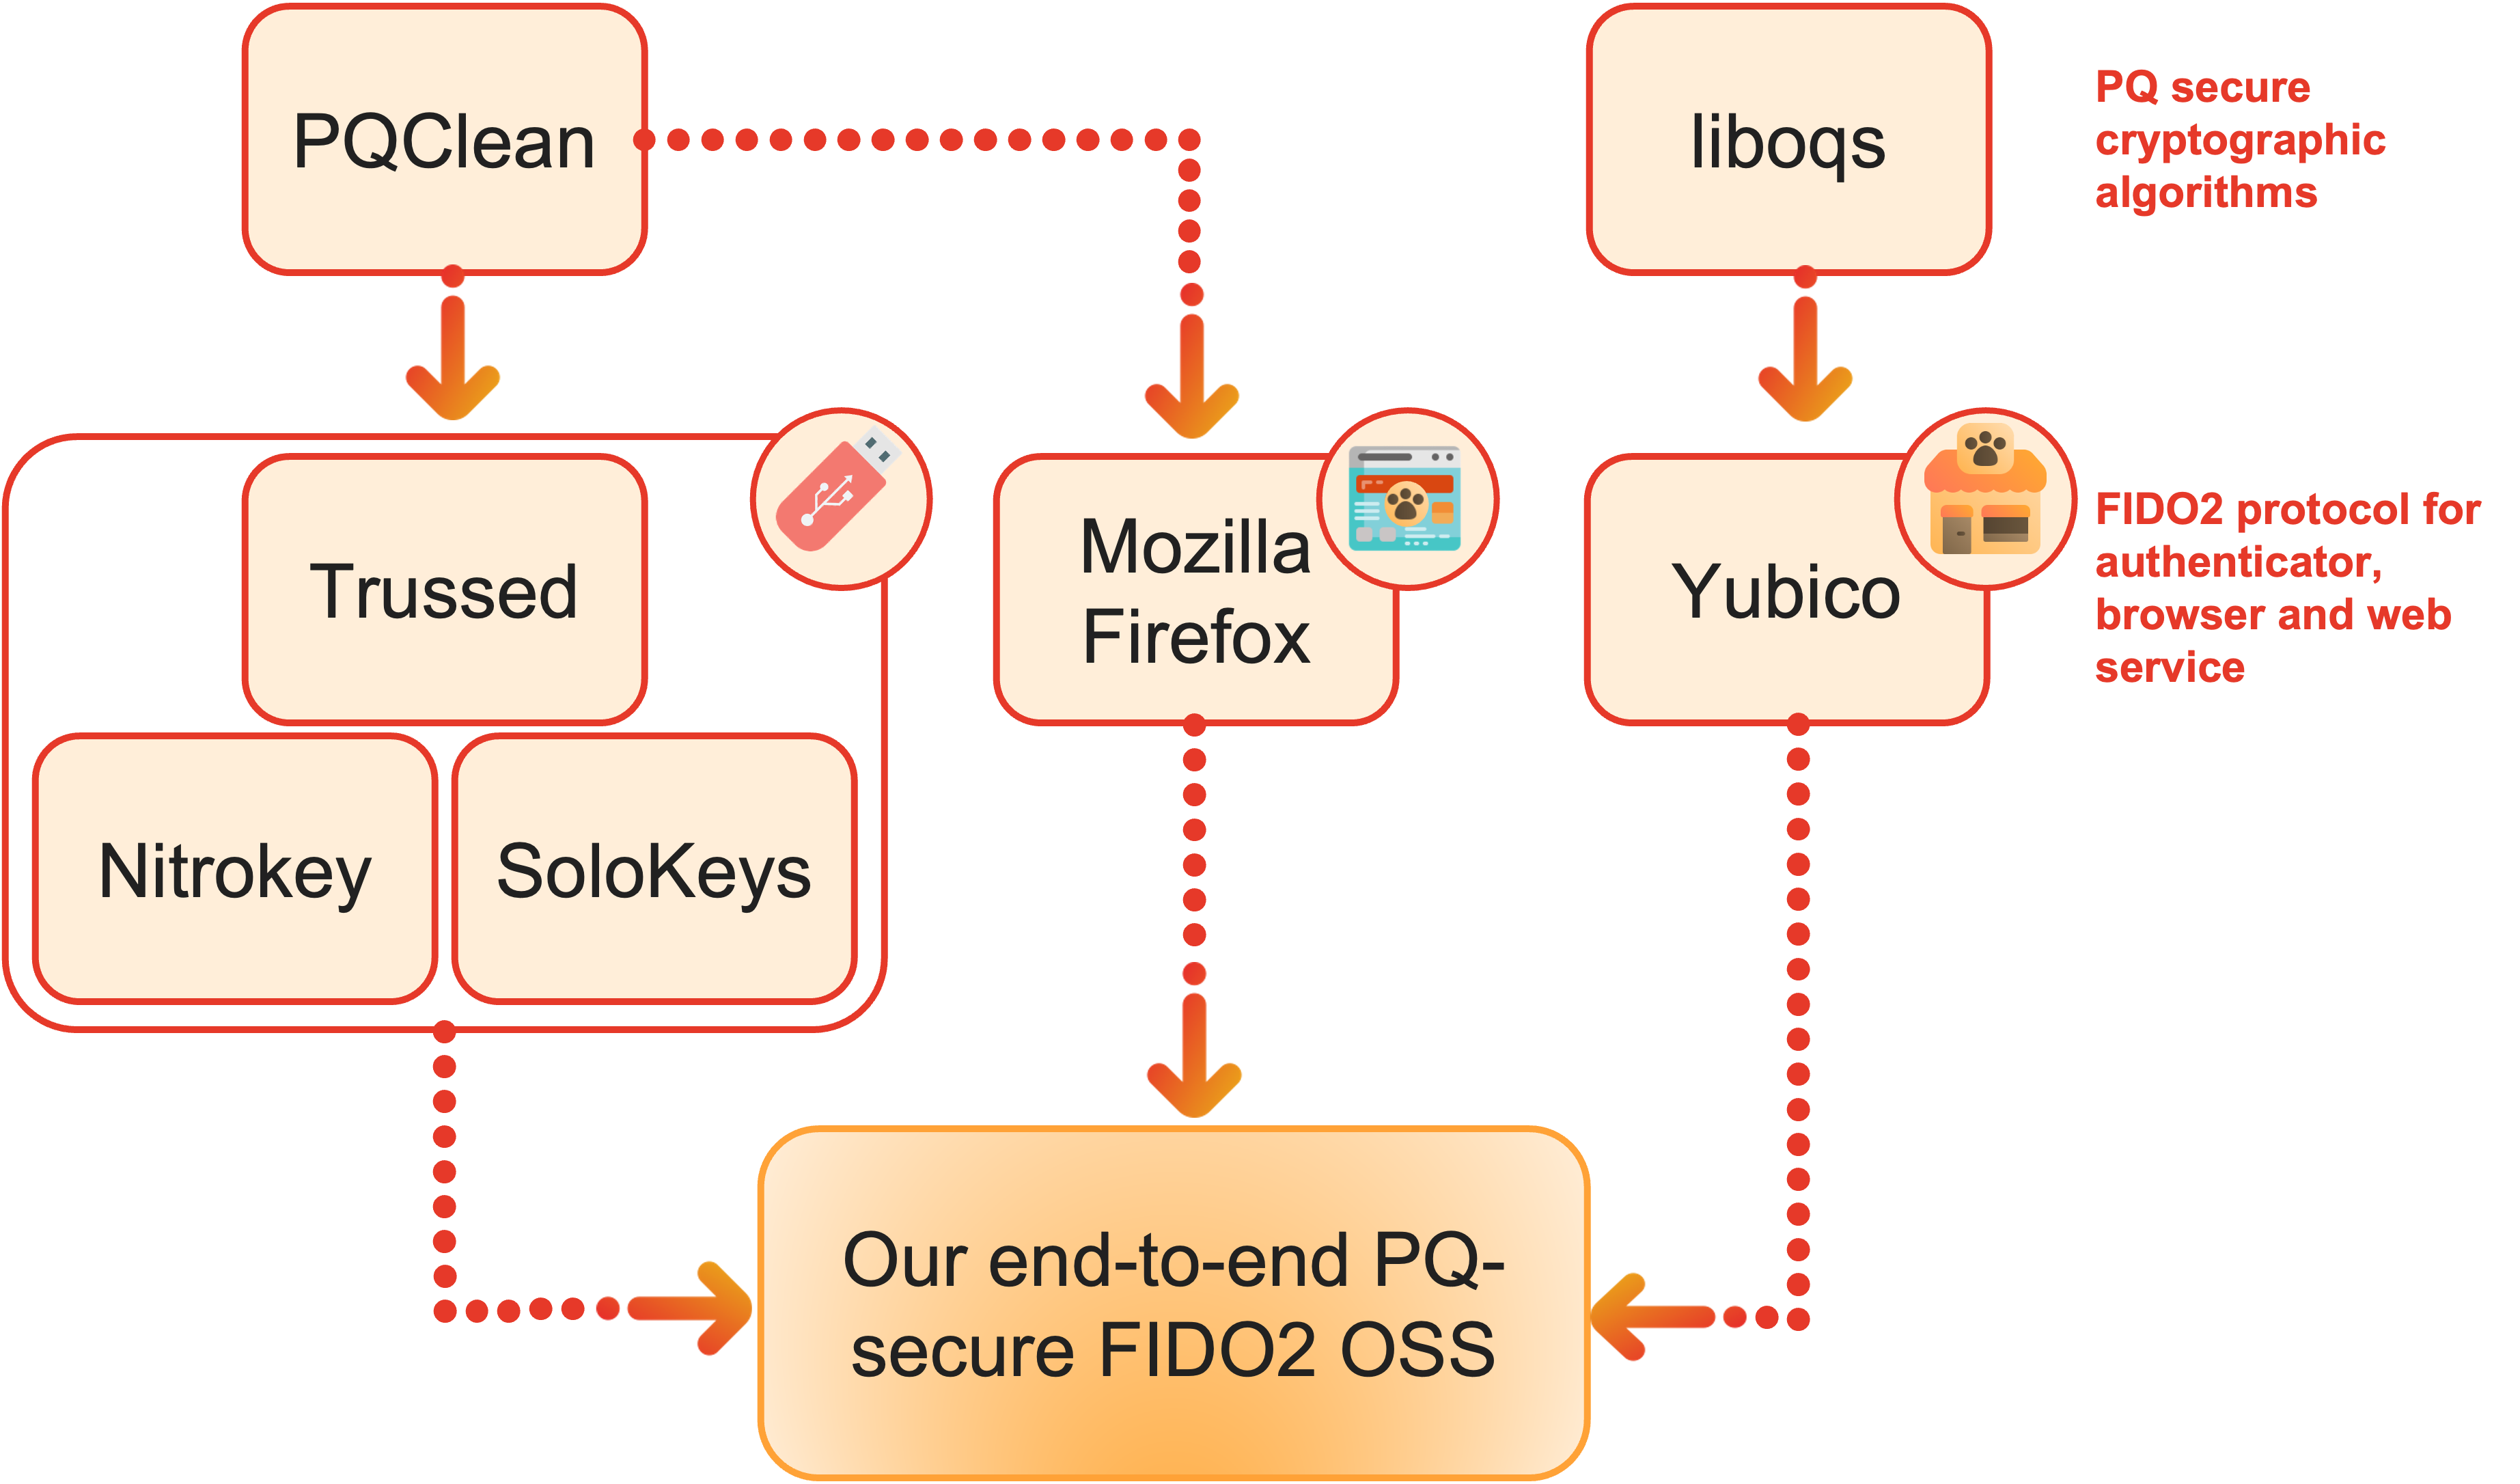 Usage of open-source libraries in our PQ FIDO2 implementation.